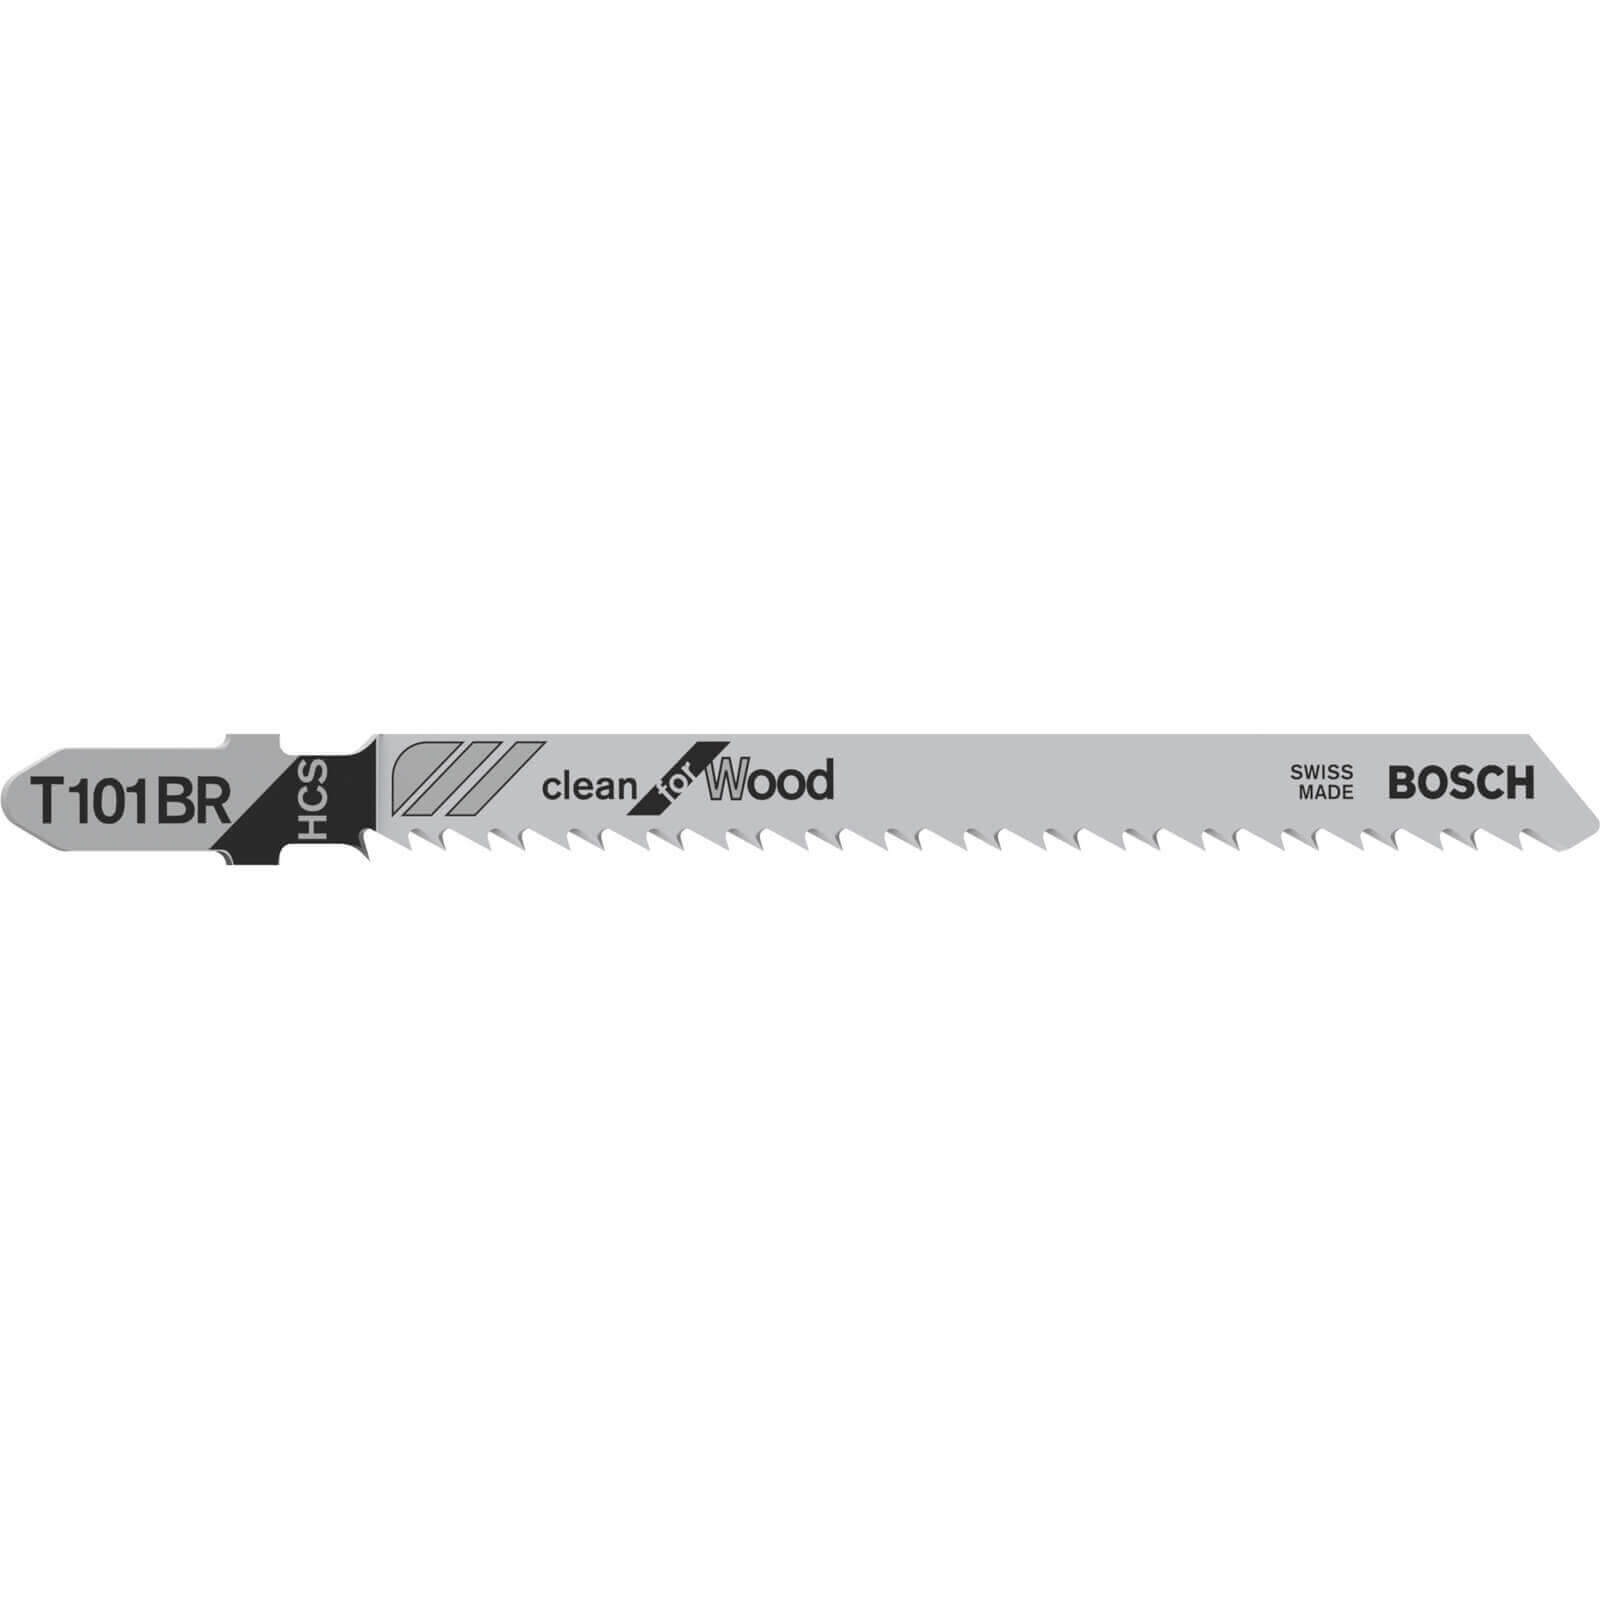 Photo of Bosch T101br Down Cutting Wood Jigsaw Blades Pack Of 25